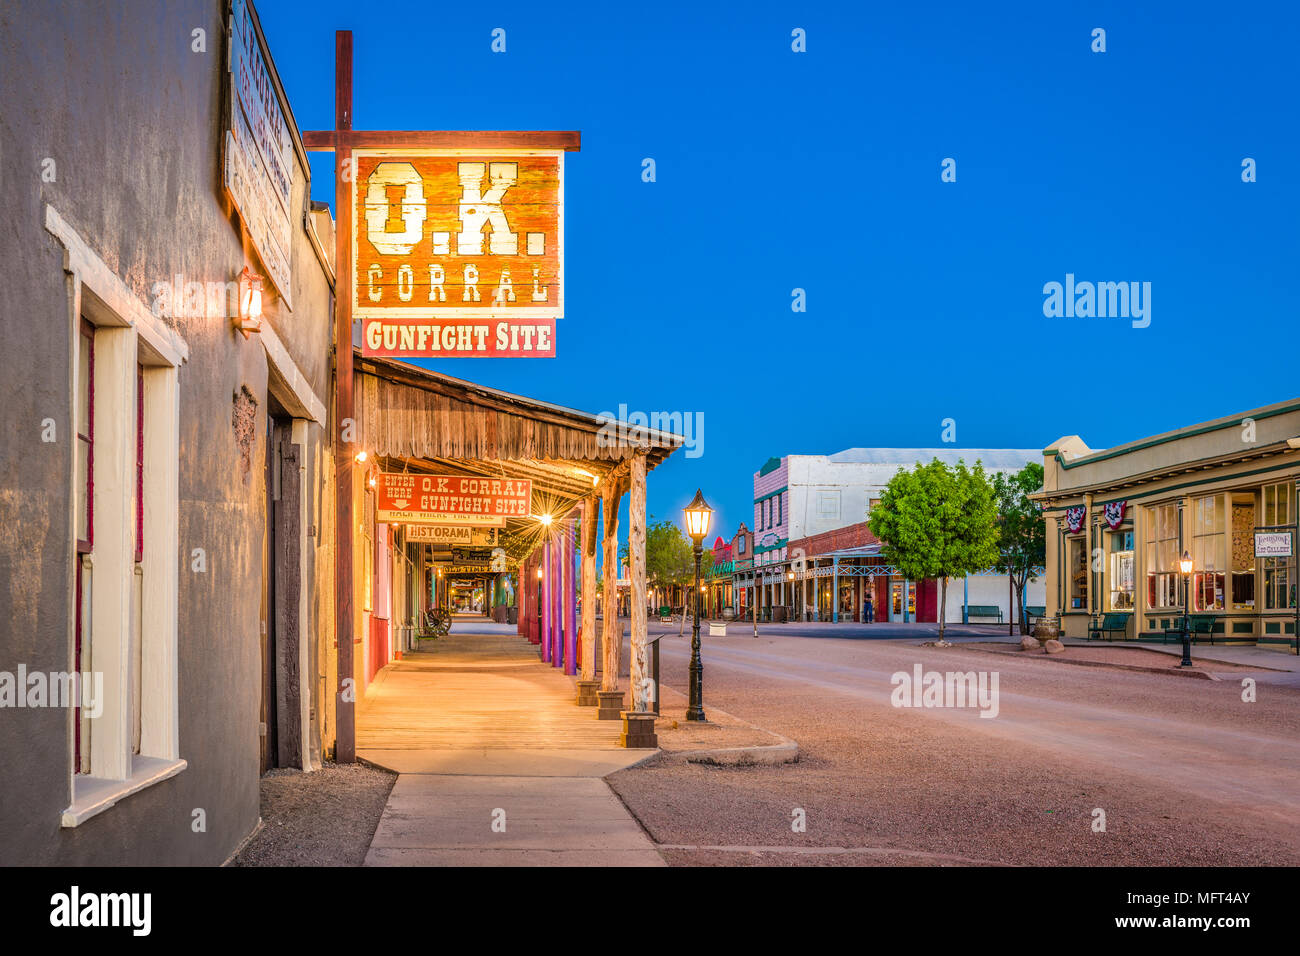 TOMBSTONE, ARIZONA - APRIL 17, 2018: The O.K. Corral Gunfight Site at twilight. The site is known for the most famous shootout in the history of the A Stock Photo